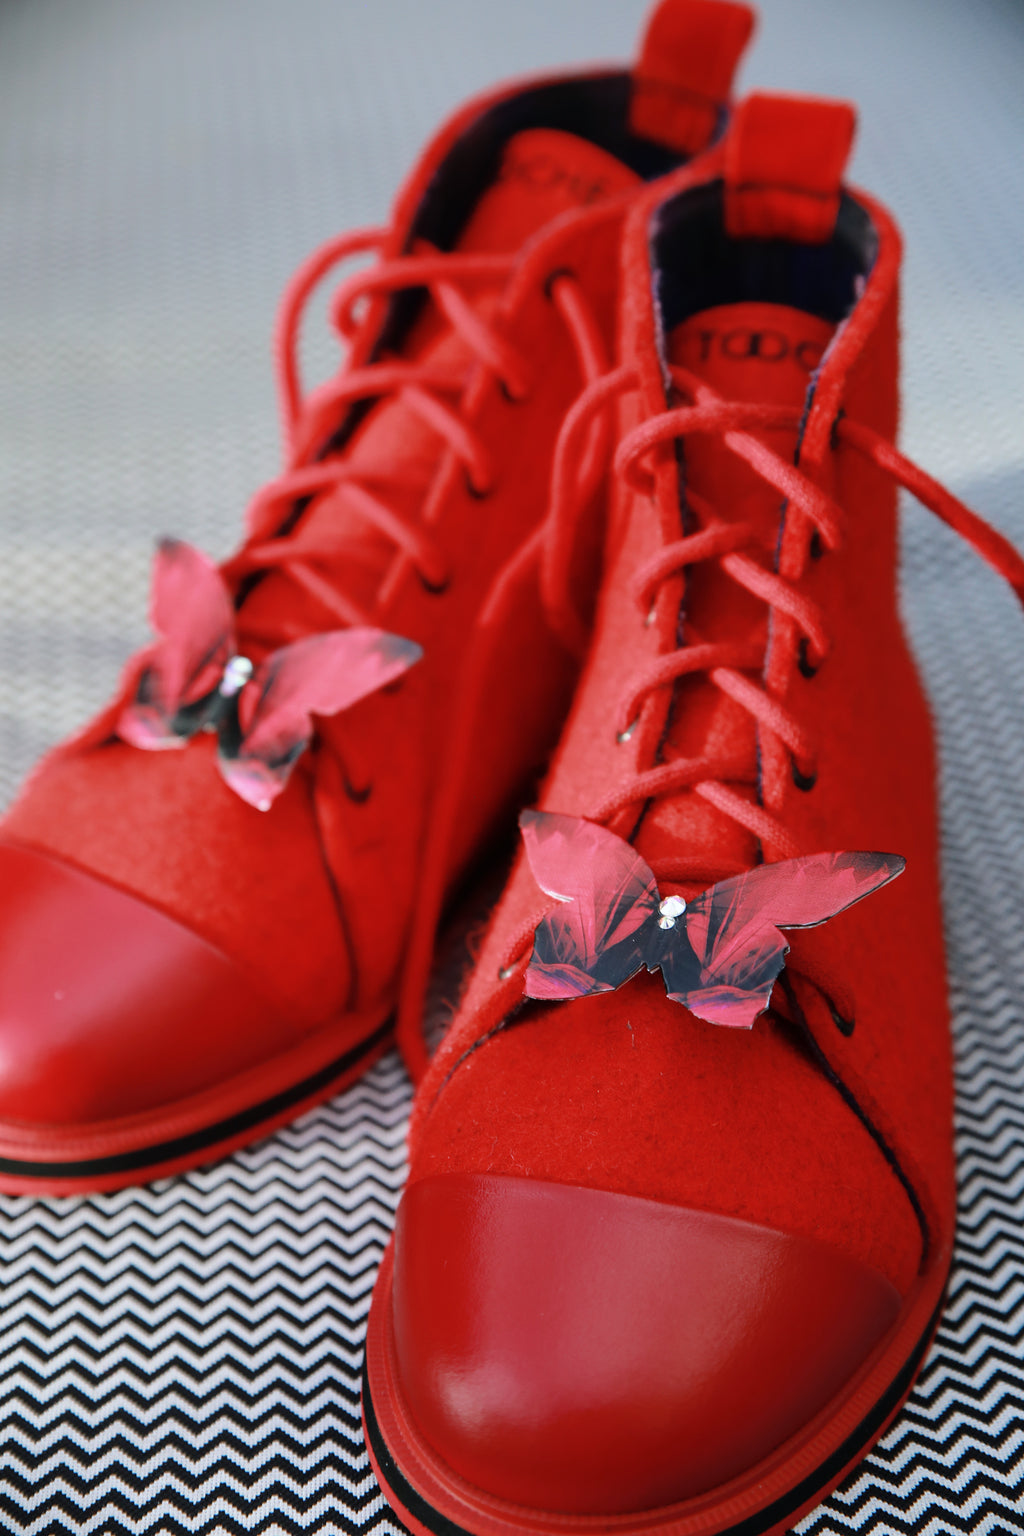 CANDY APPLE RED shoes